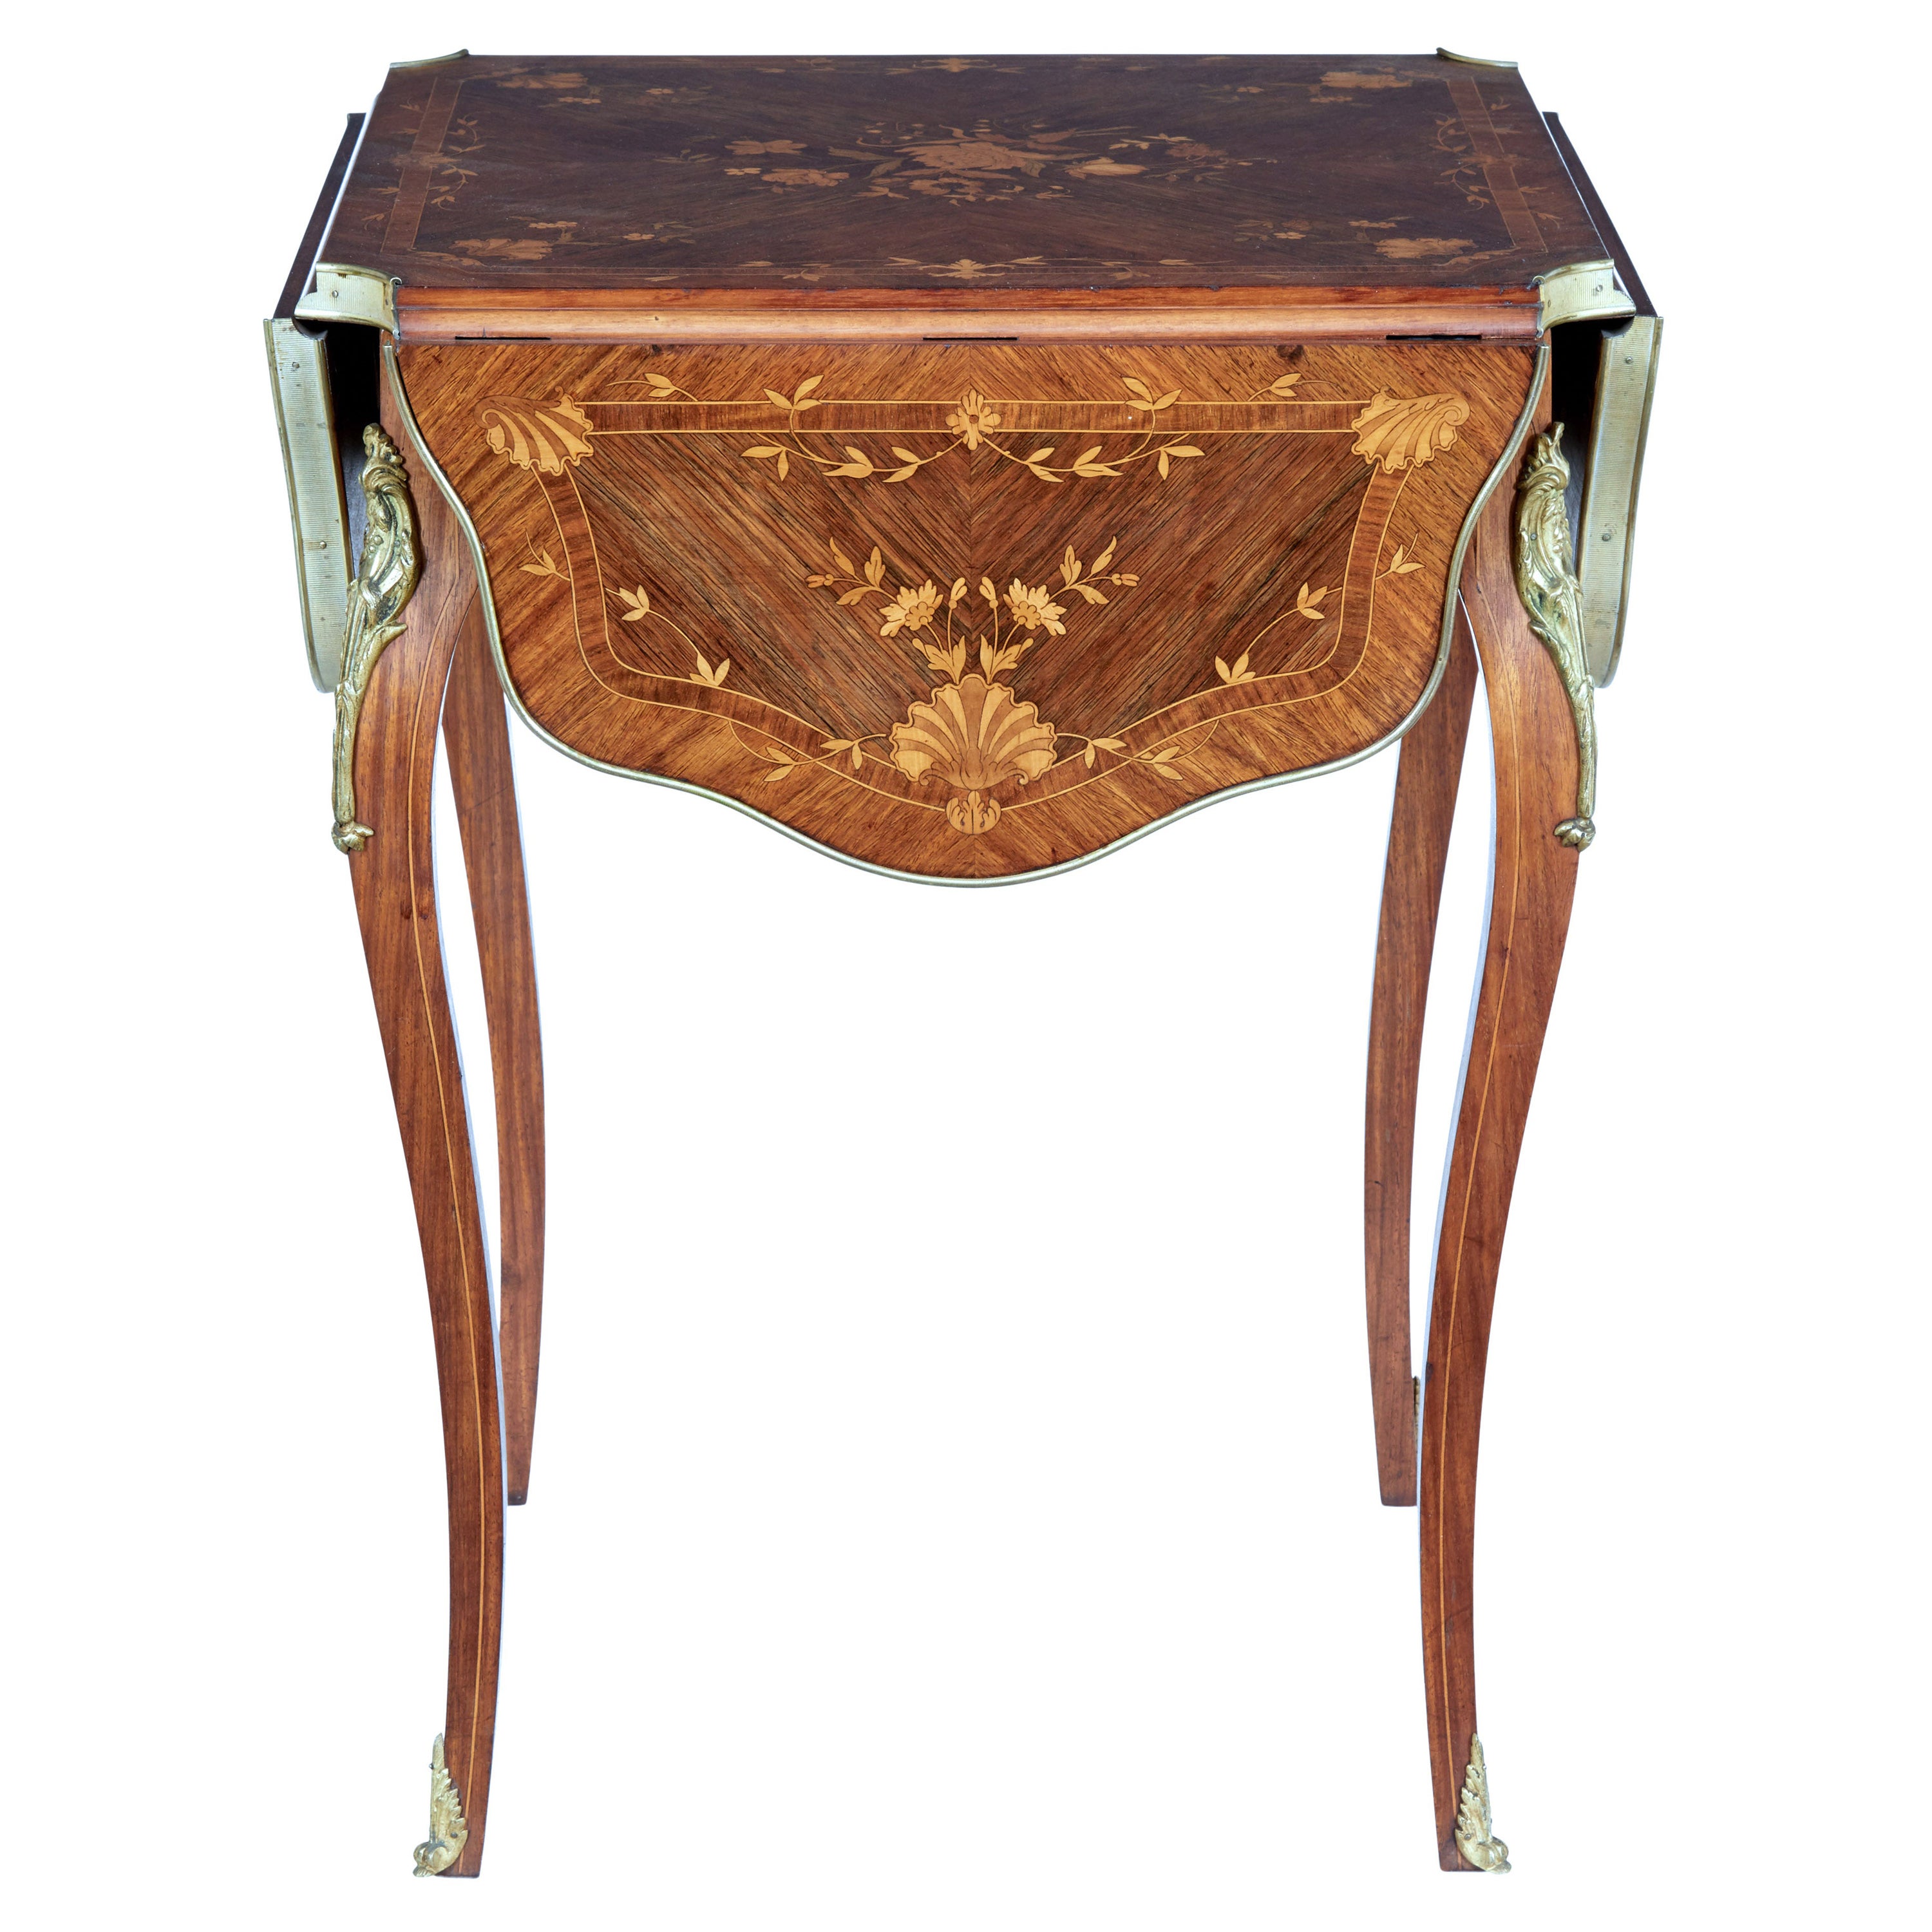 19th Century Walnut Inlaid Envelope Drop Leaf Occasional Table